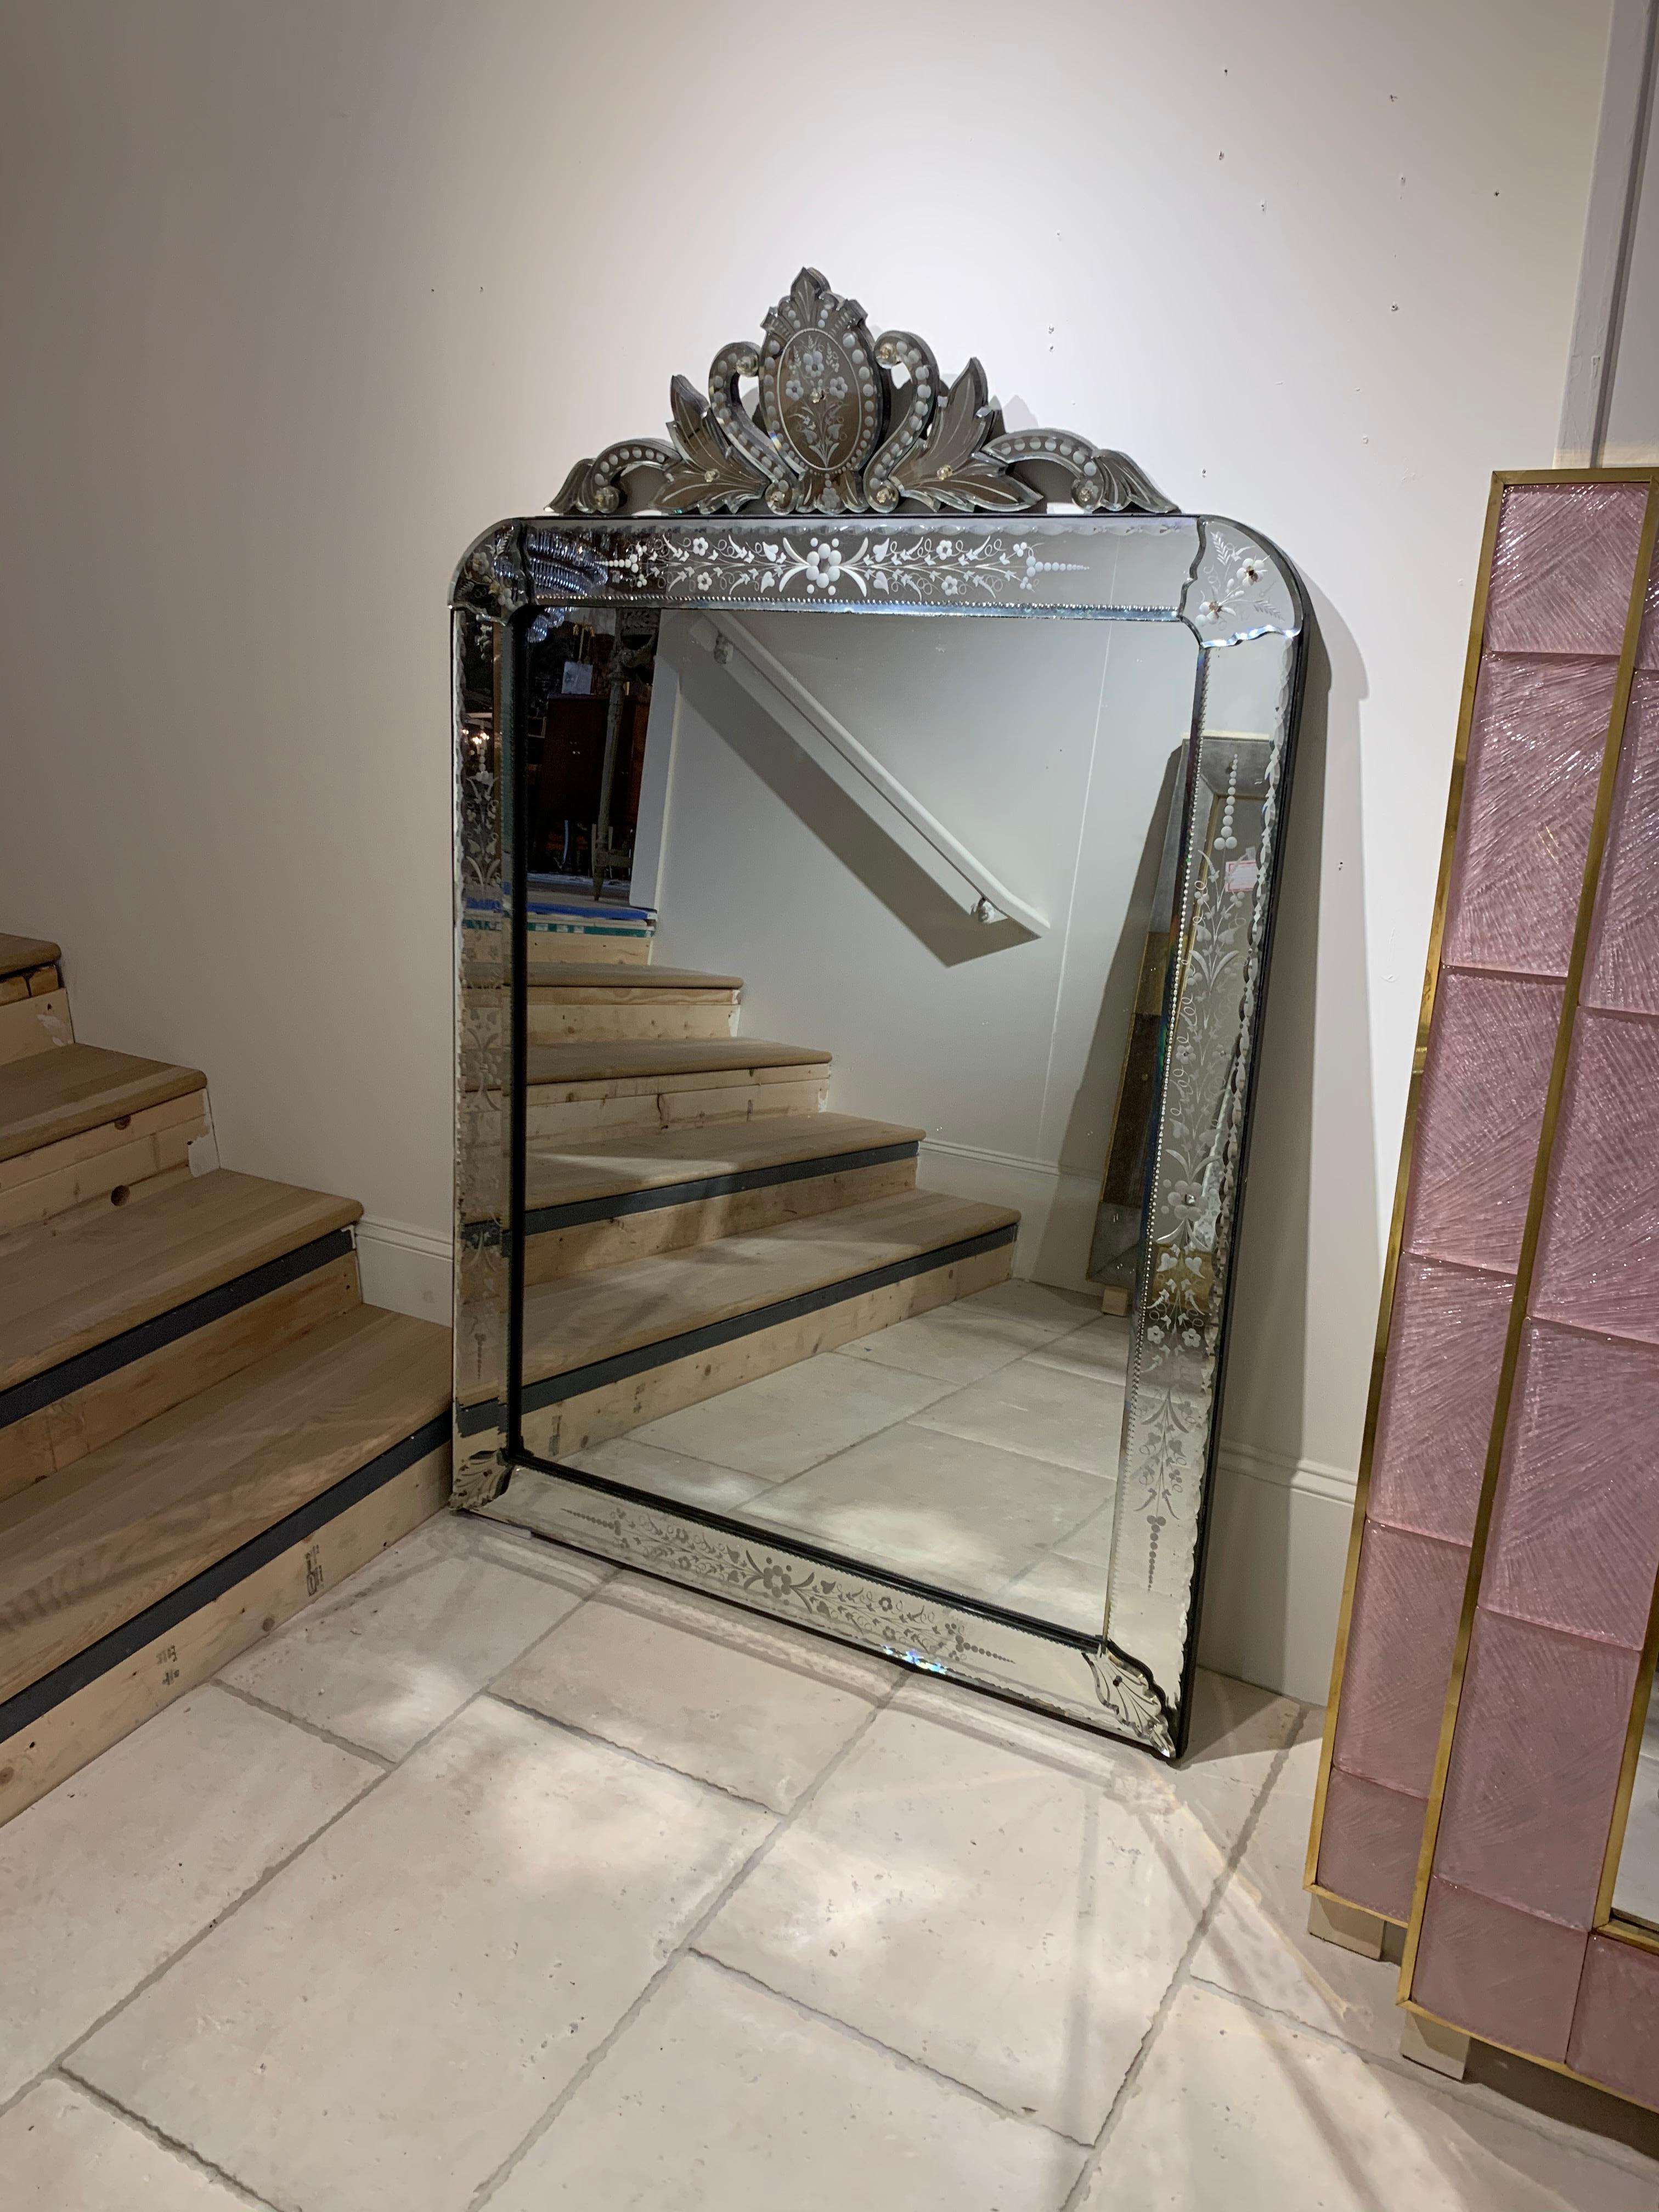 Exquisite Italian Venetian style etched glass mirror. The mirror has a beautiful crown and the top and very Fine etched images. Would be gorgeous over a mantel (fireplace)!
 